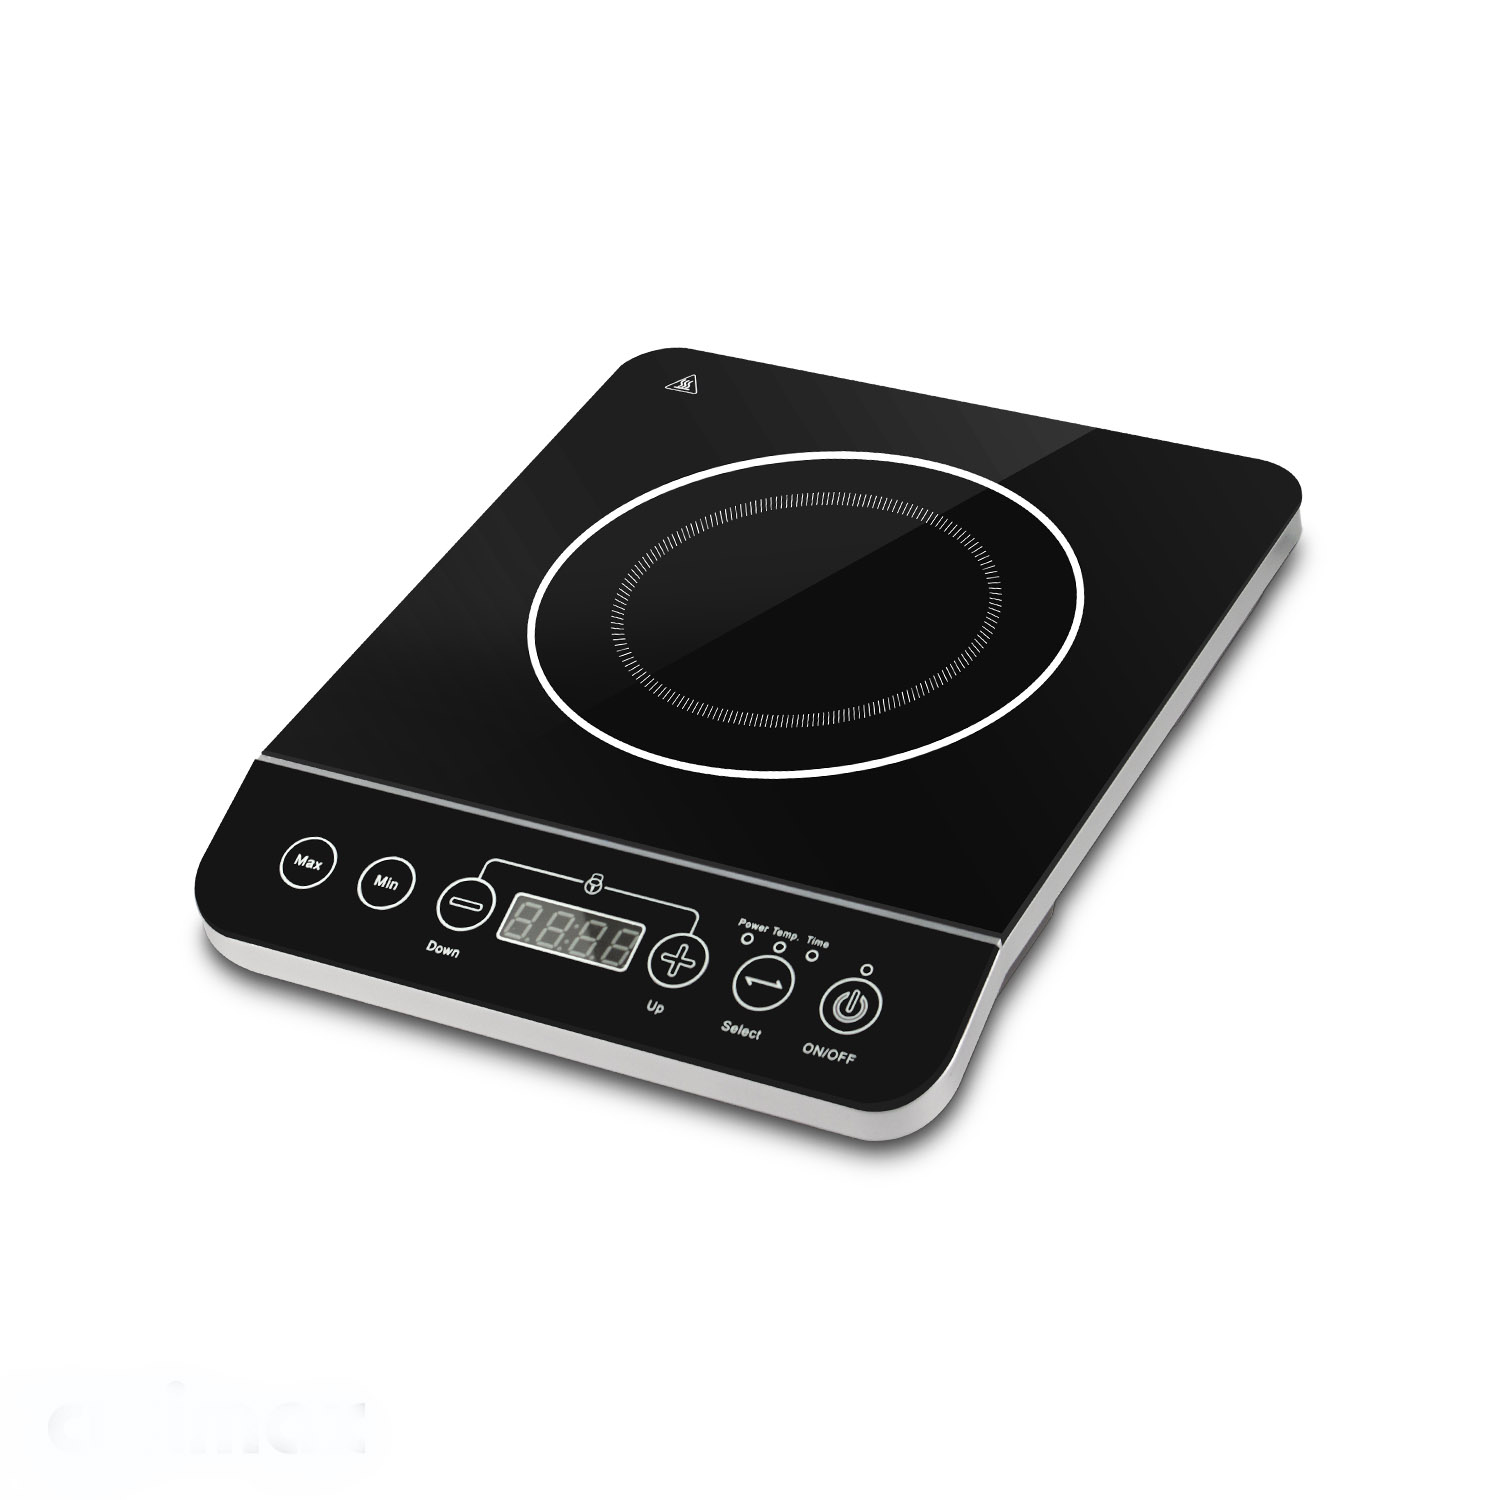 Cusimax Induction Cooktop,1800W Stainless Steel Portable Cooktop with